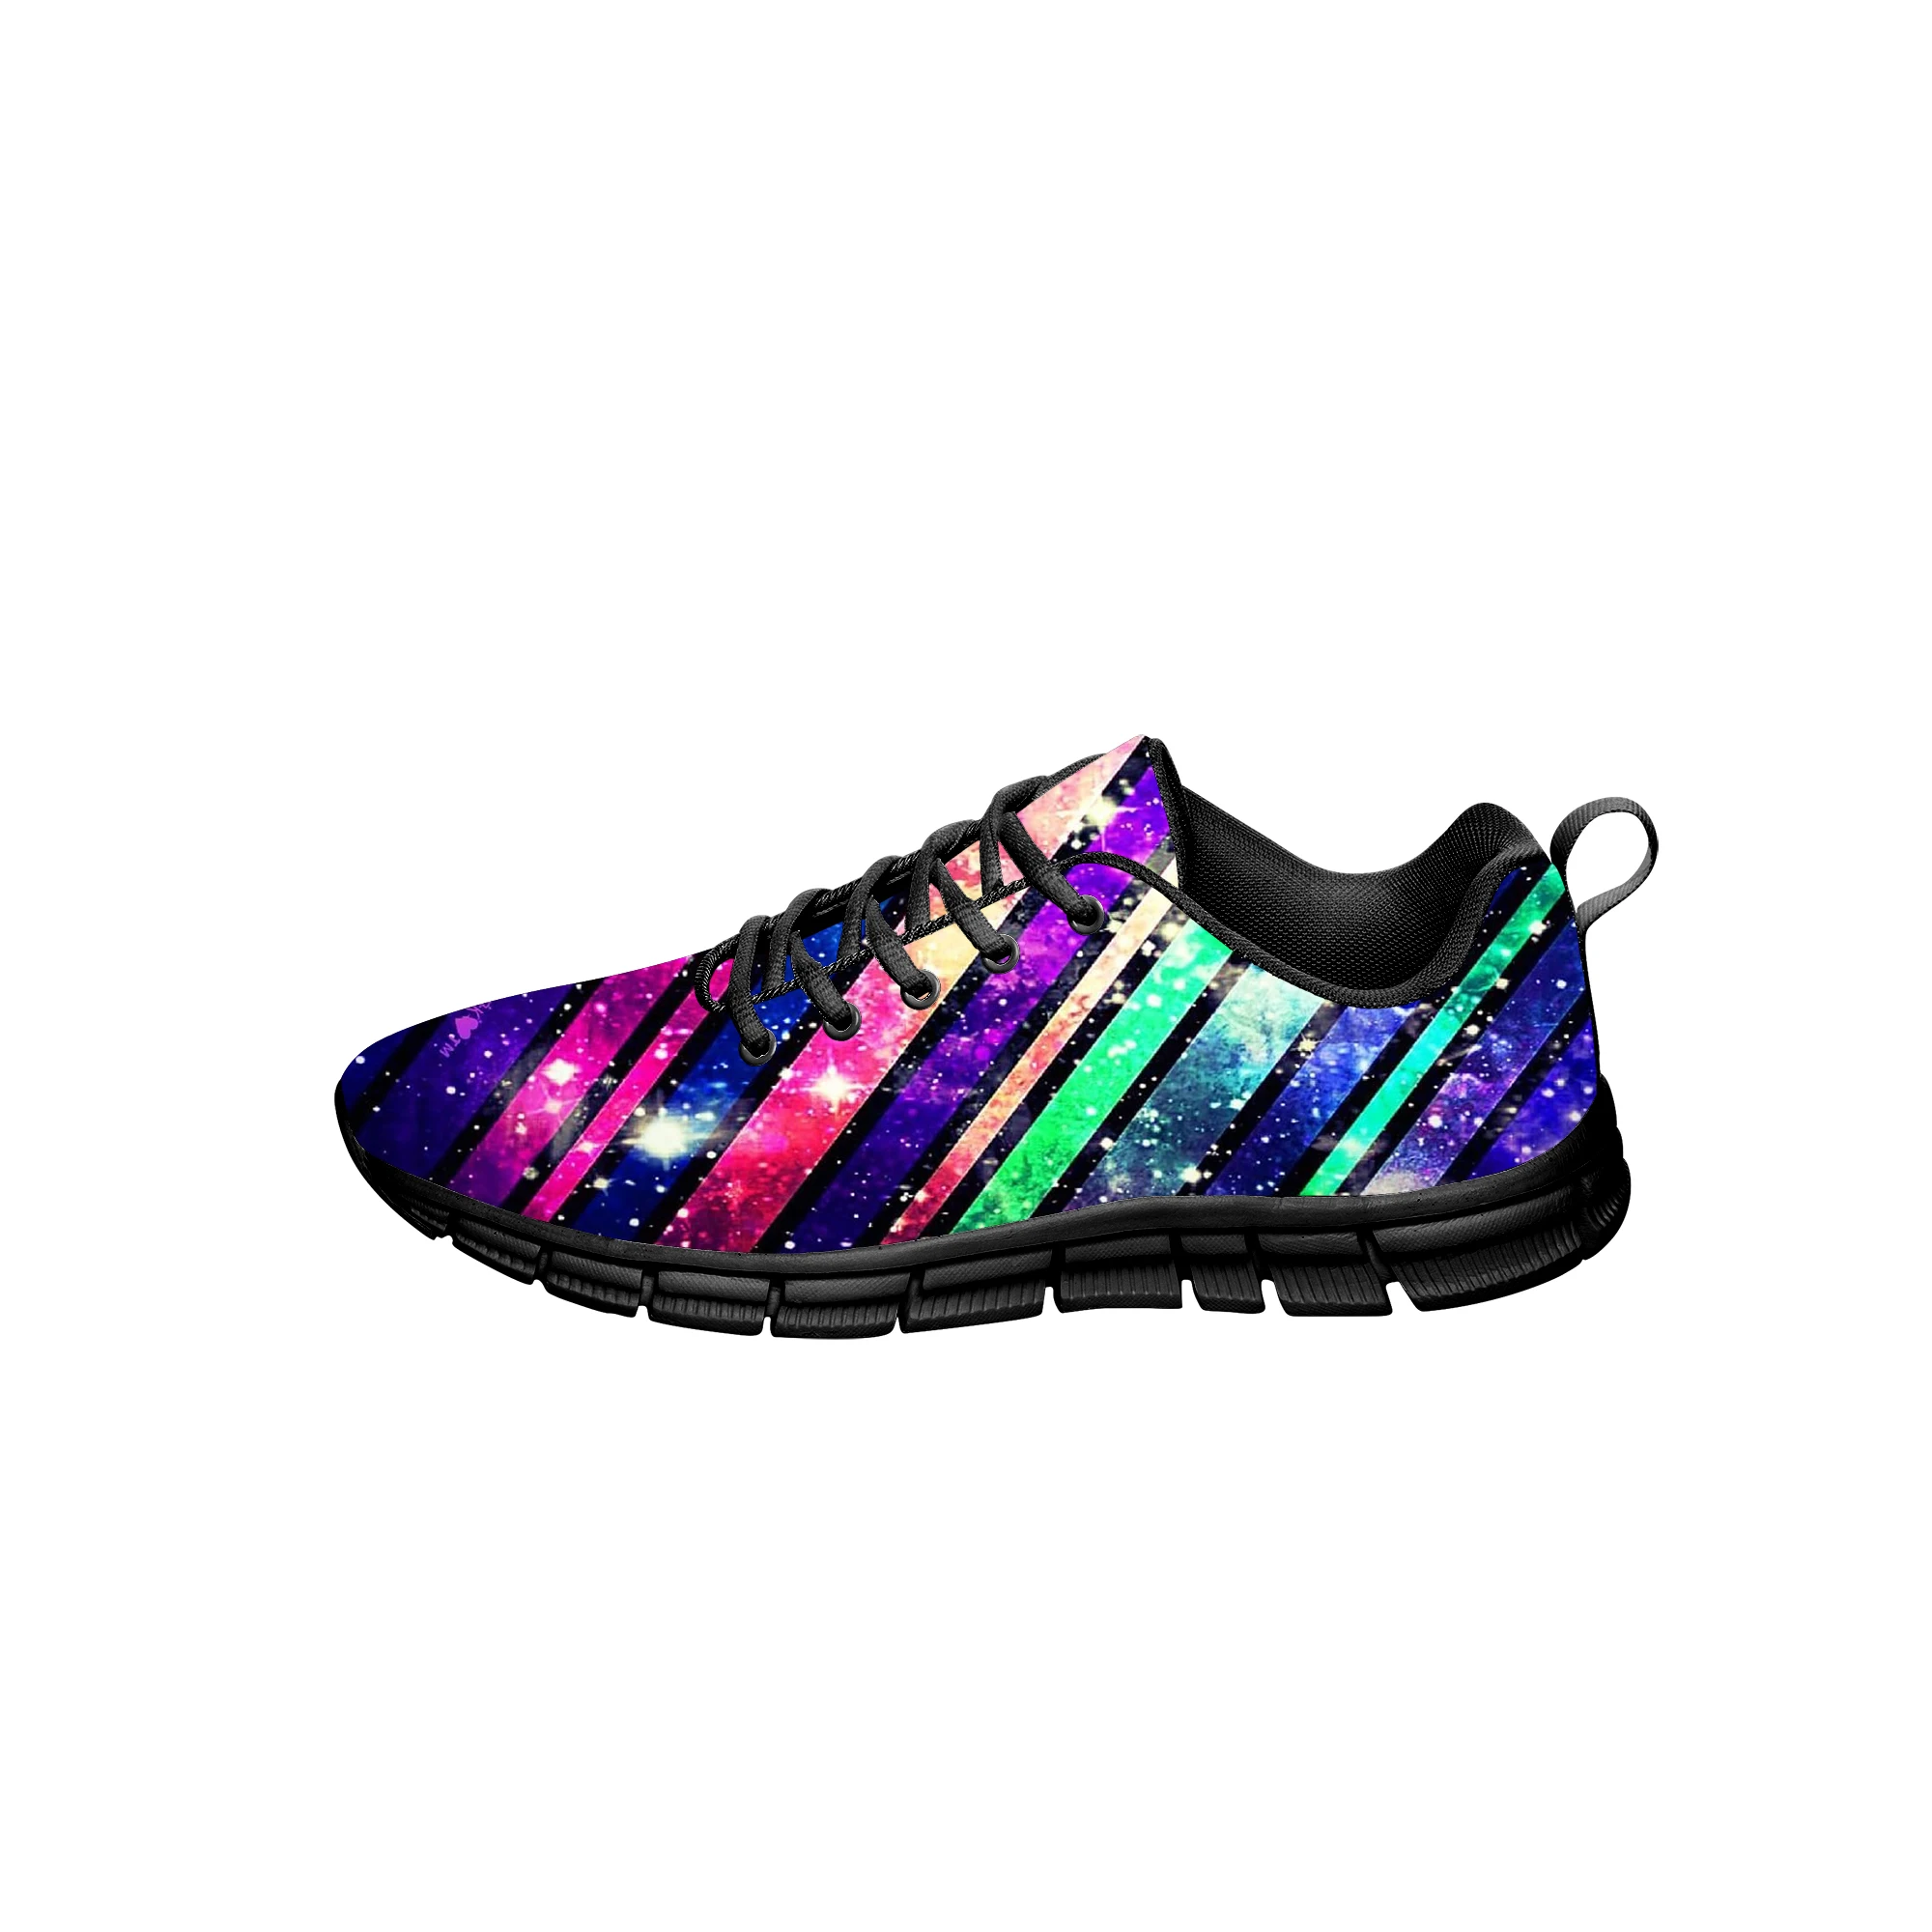 

Rainbow Glitter Sneakers Mens Womens Teenager Funny Hot Fashion Casual Shoes Canvas Running 3D Printed Shoes Lightweight shoe